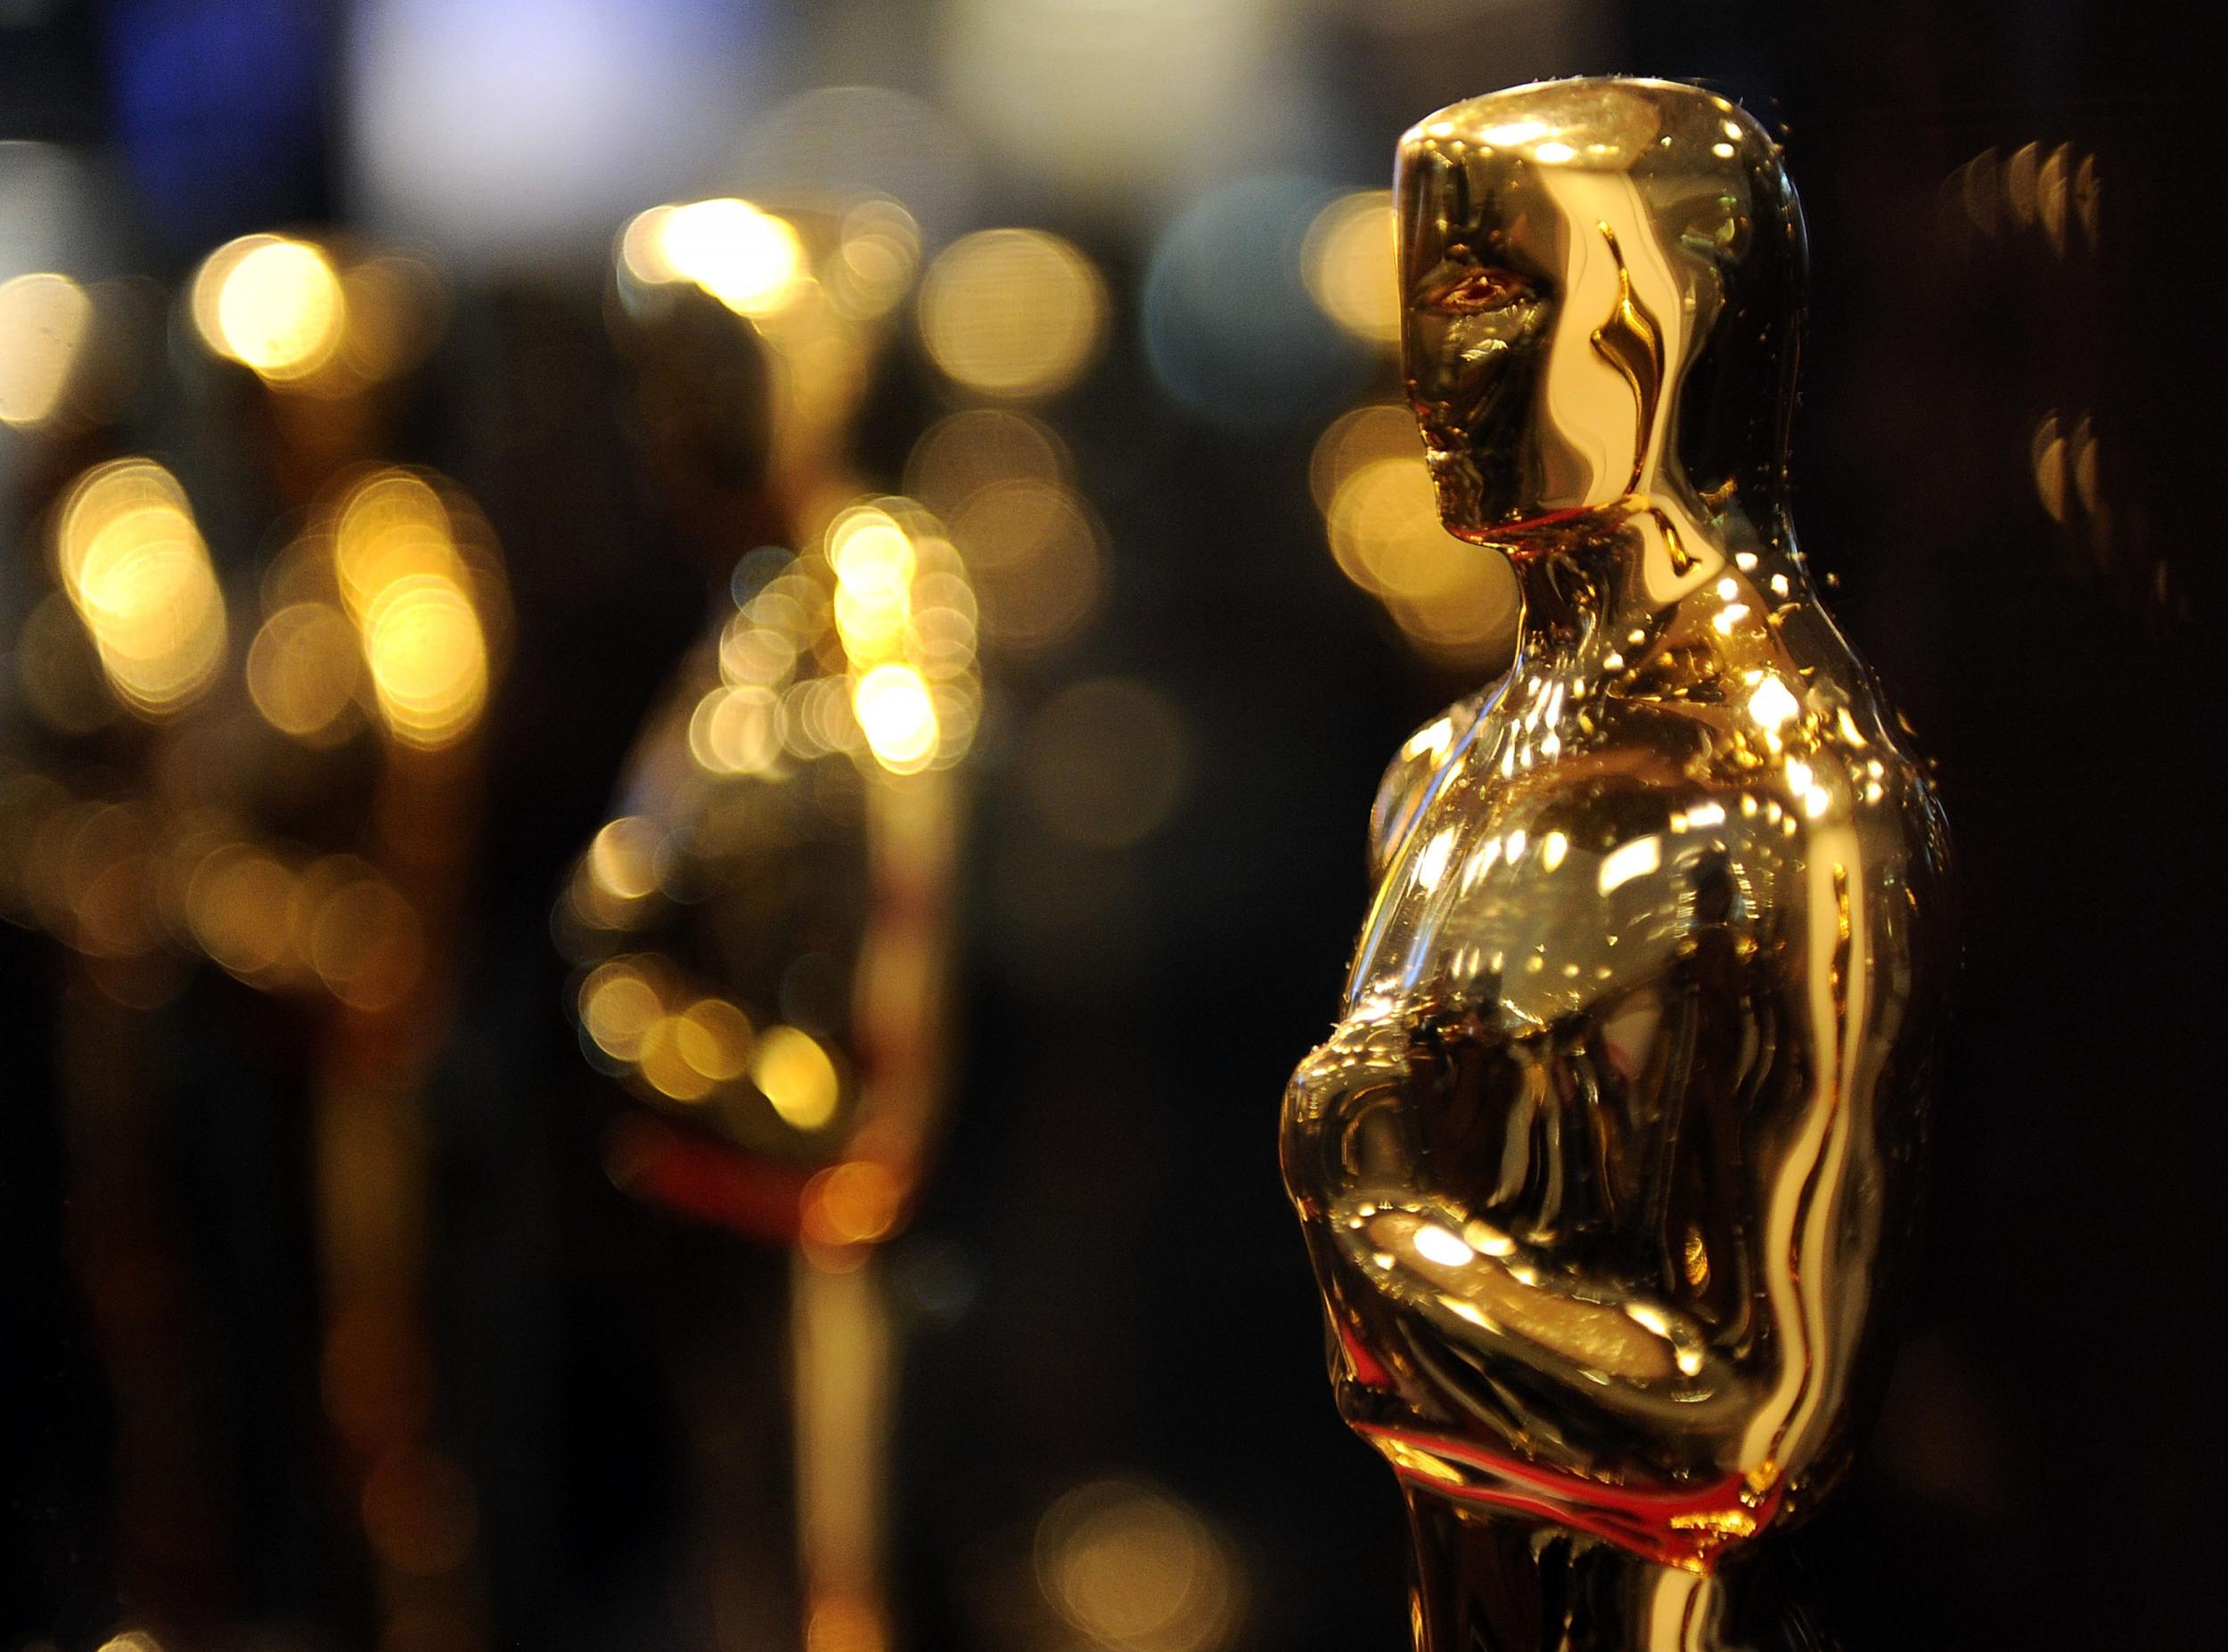 Eight Academy awards will be presented prior to the live event this year